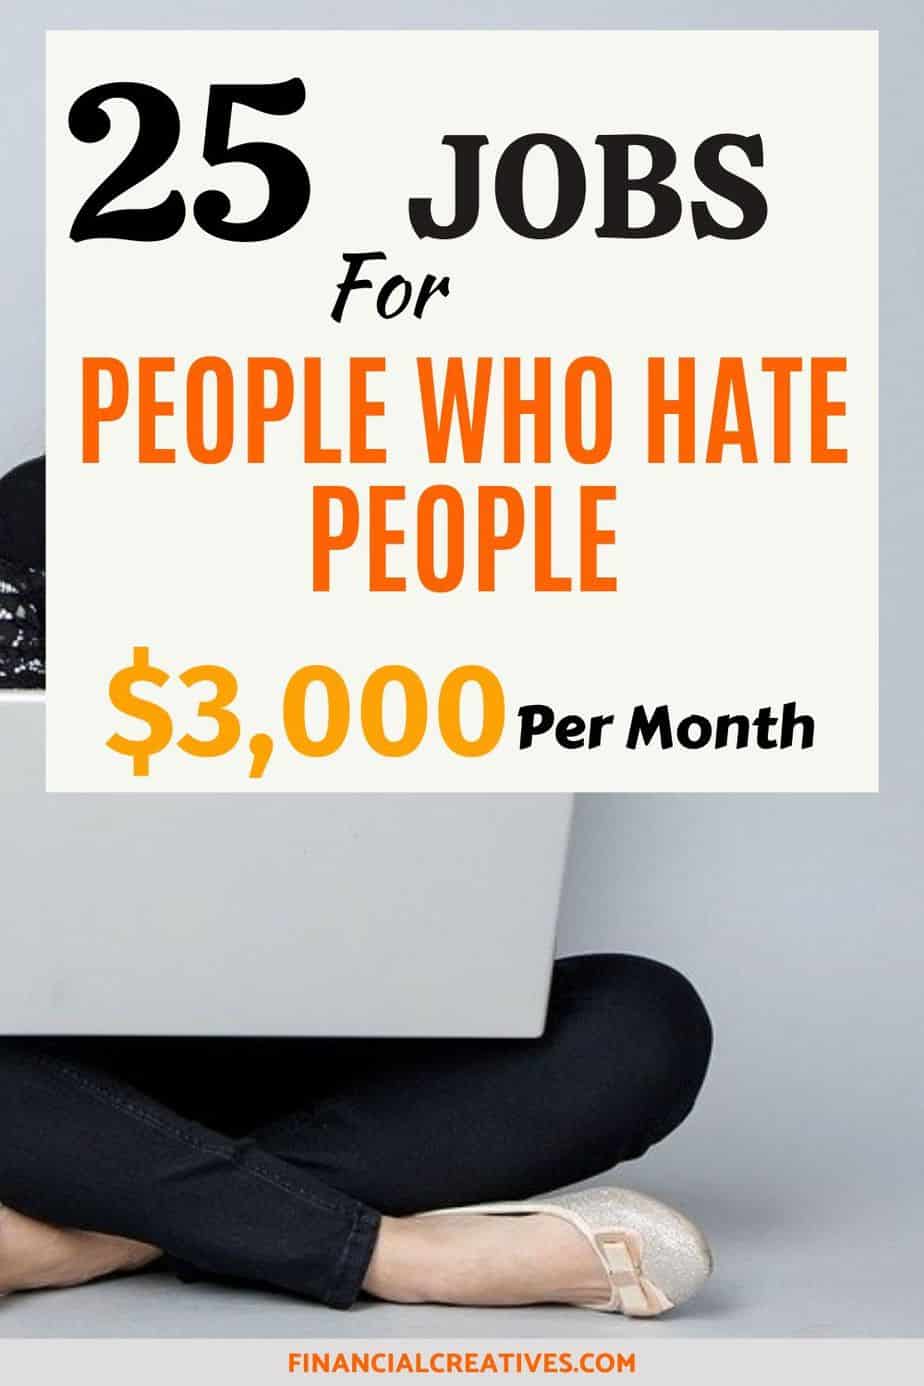 25 Jobs for People Who Hate People. 